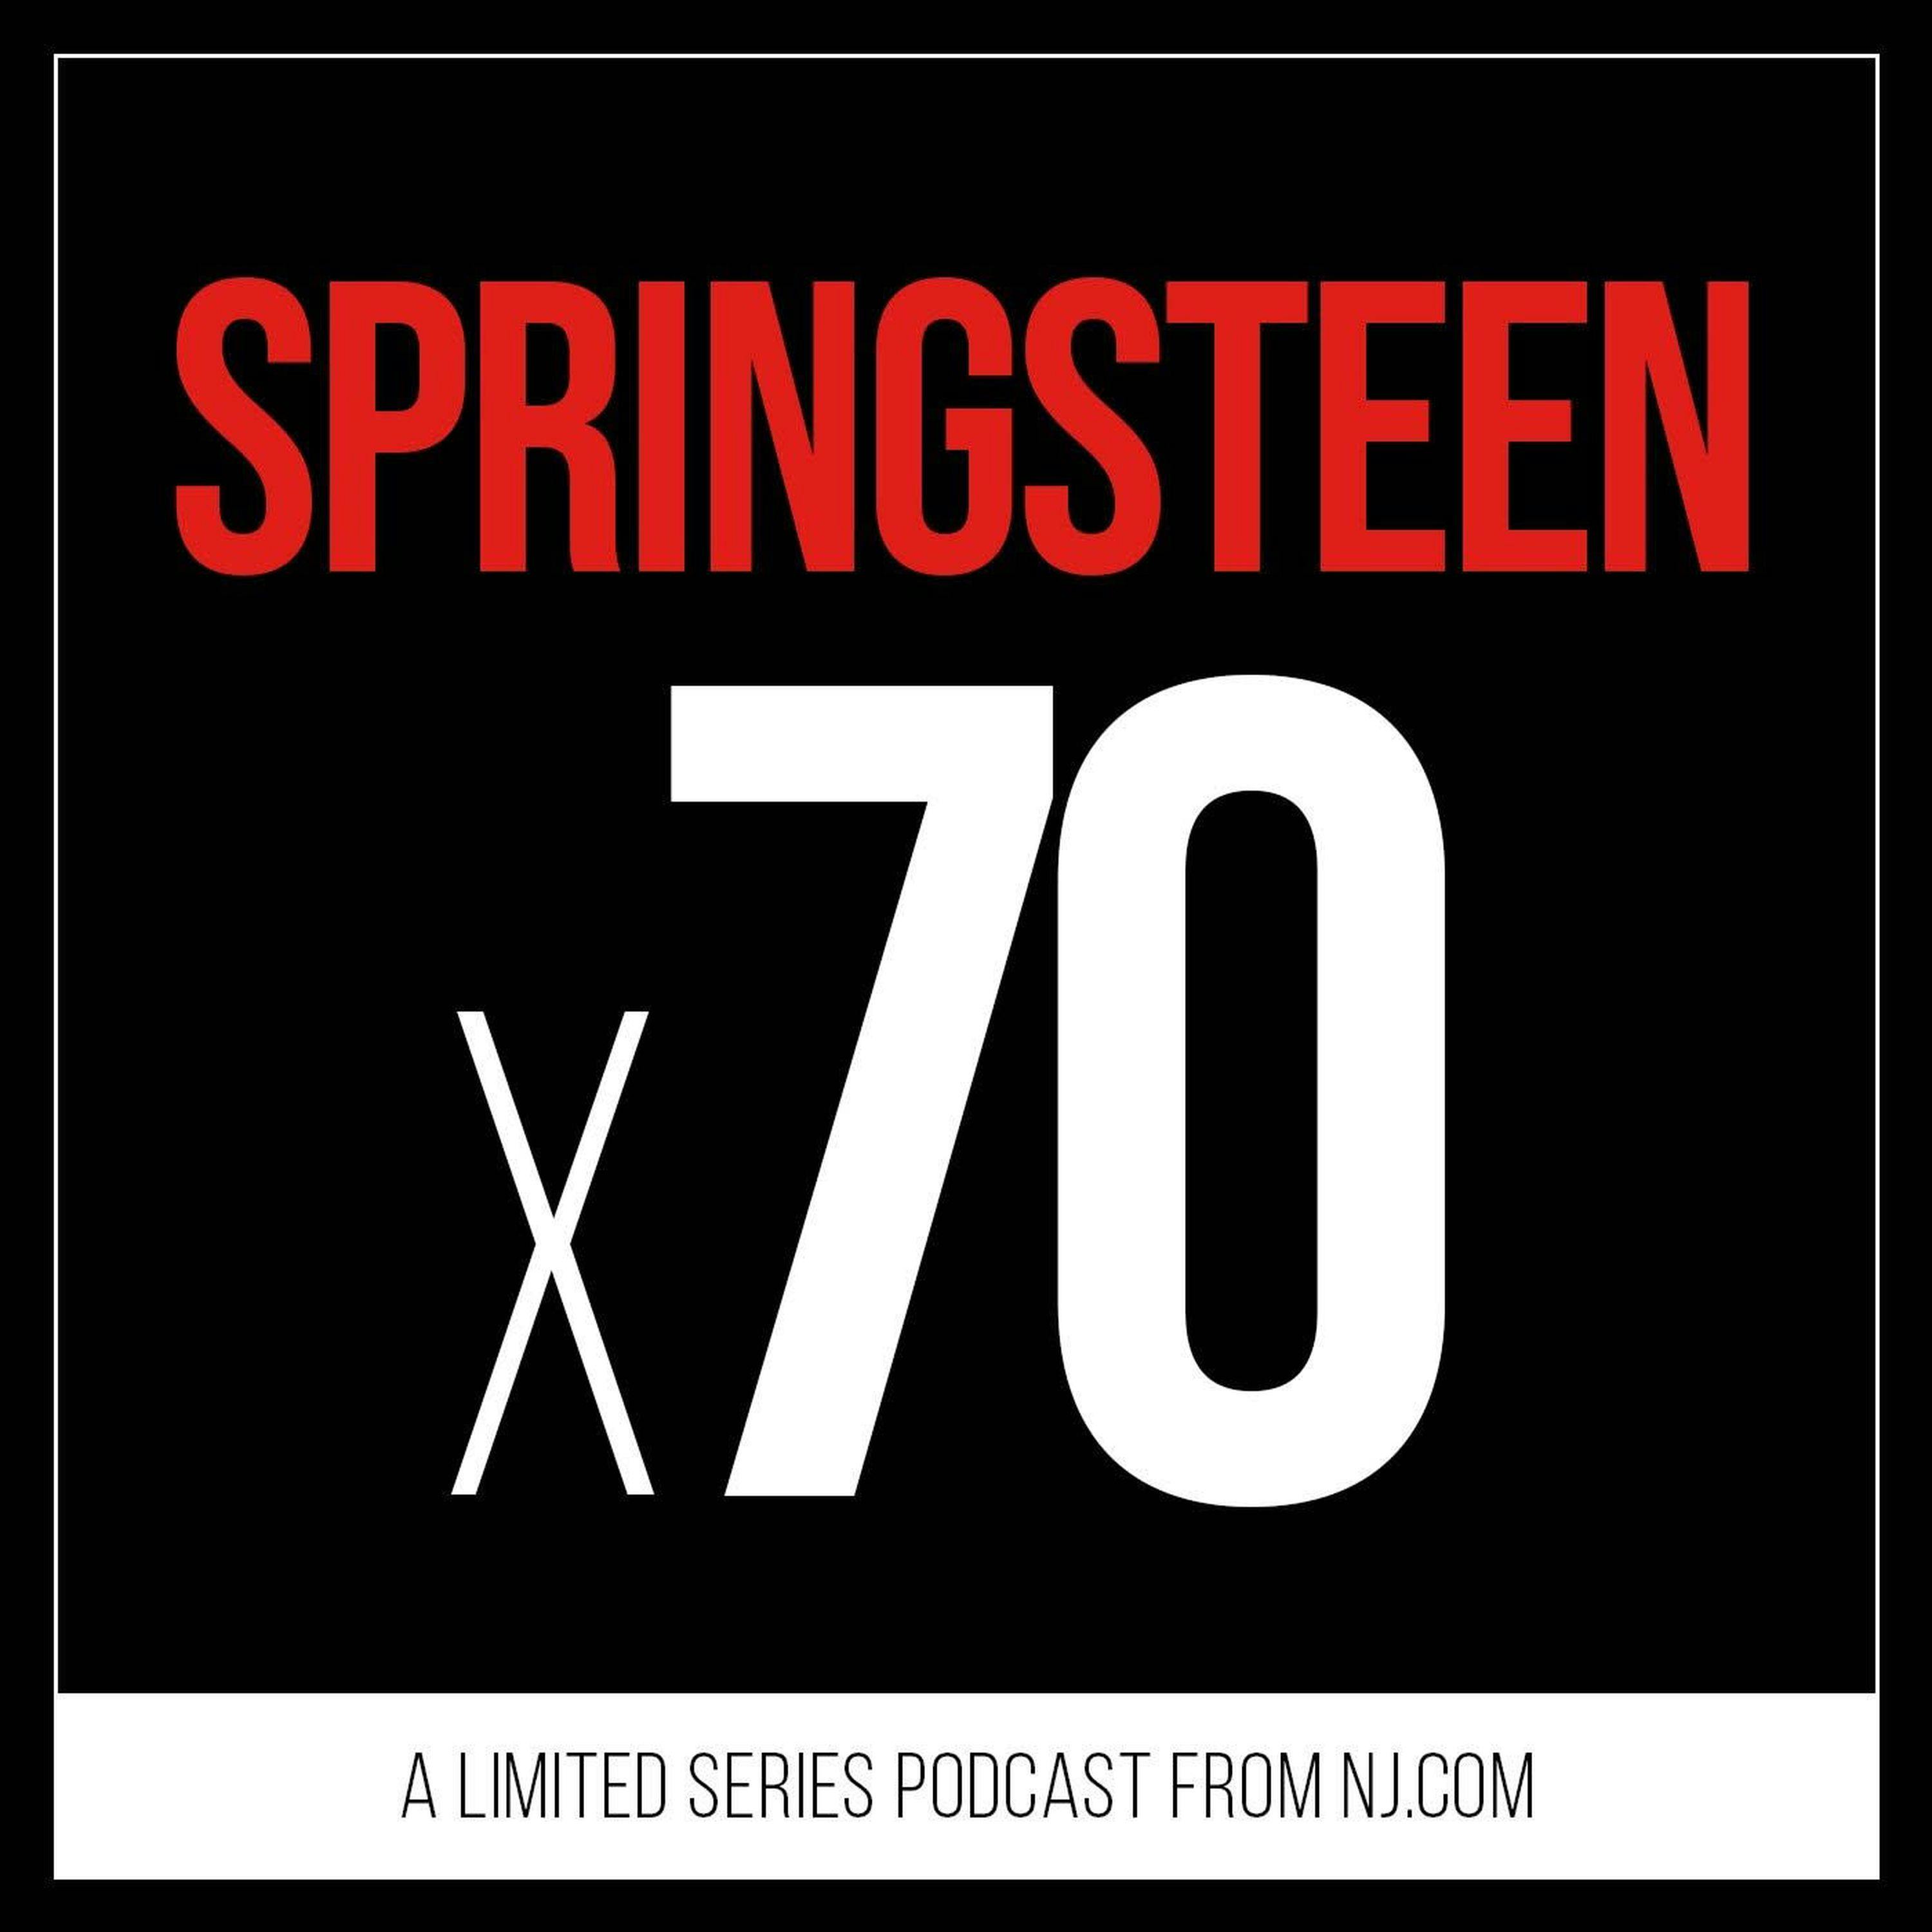 Episode 2: Songs 60 to 51